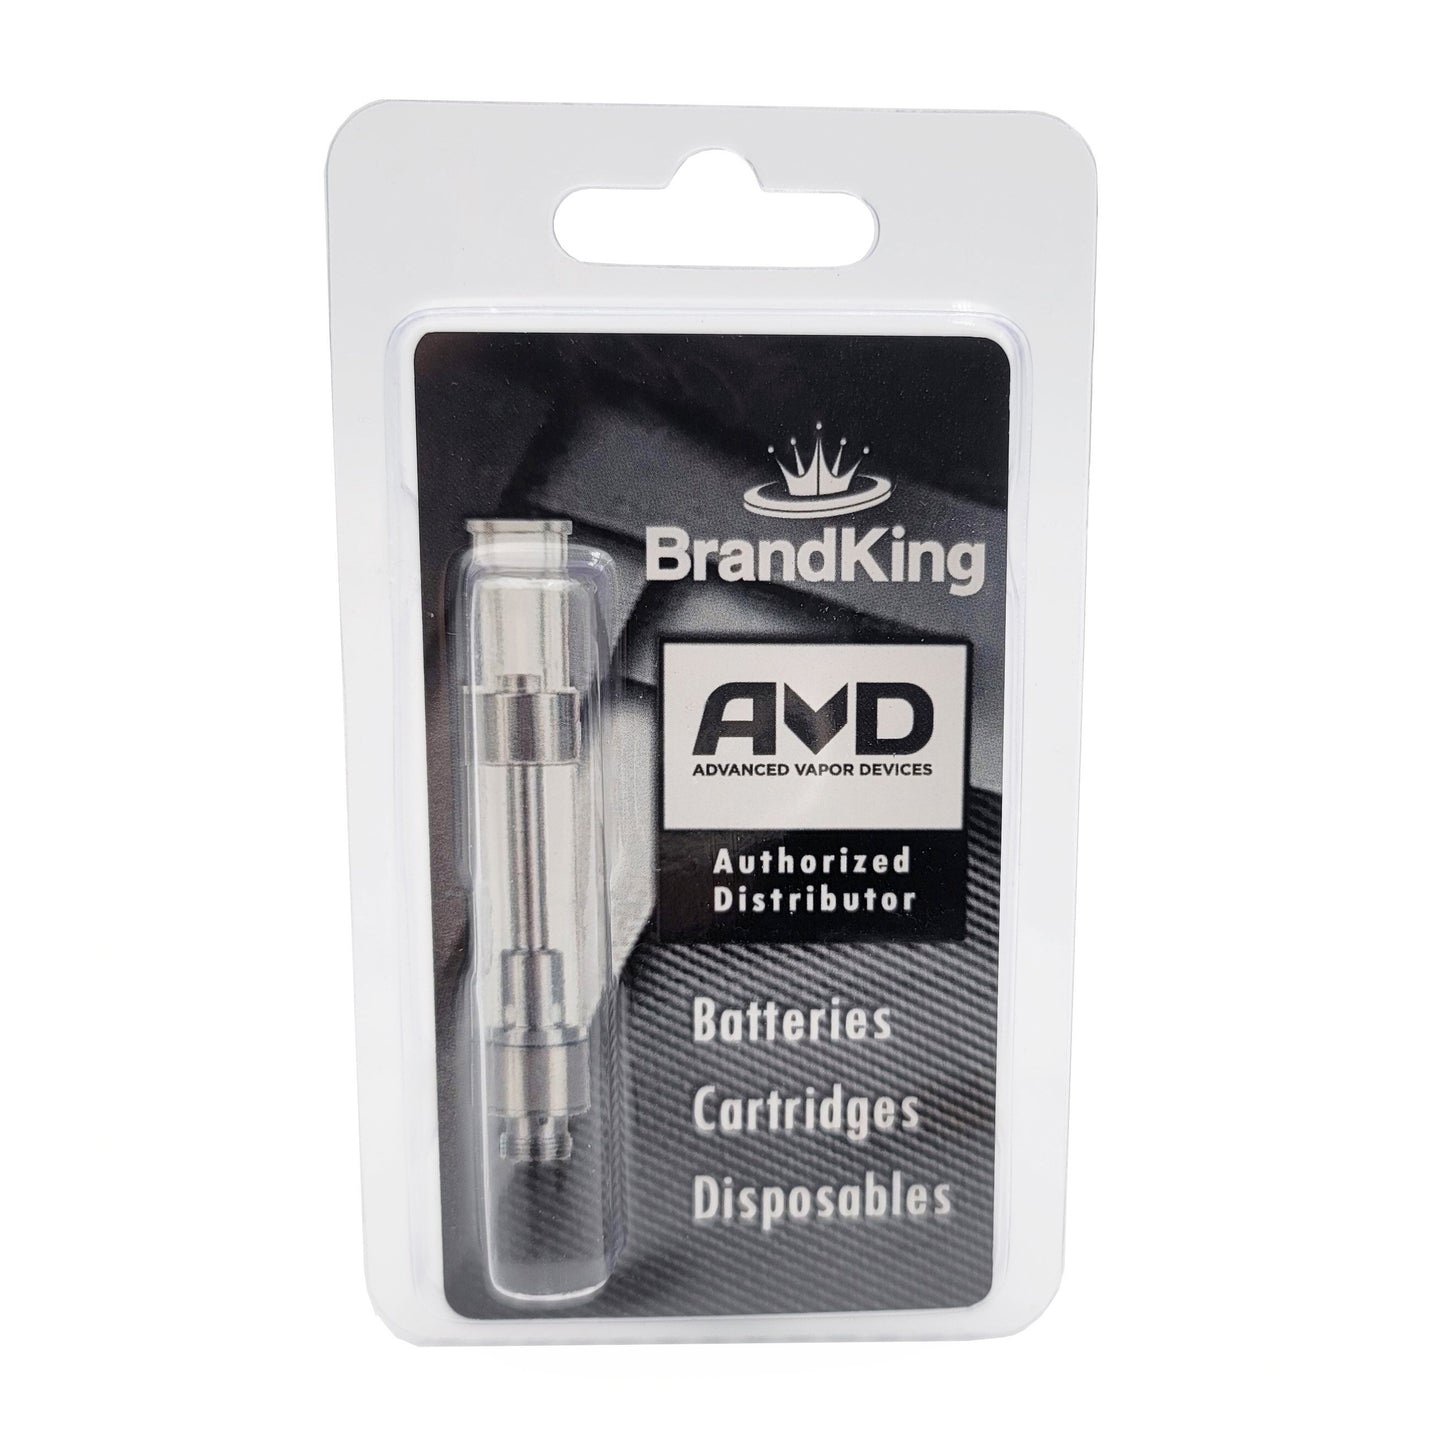 Clamshell Blister Pack for .5ml Cartridges Clear